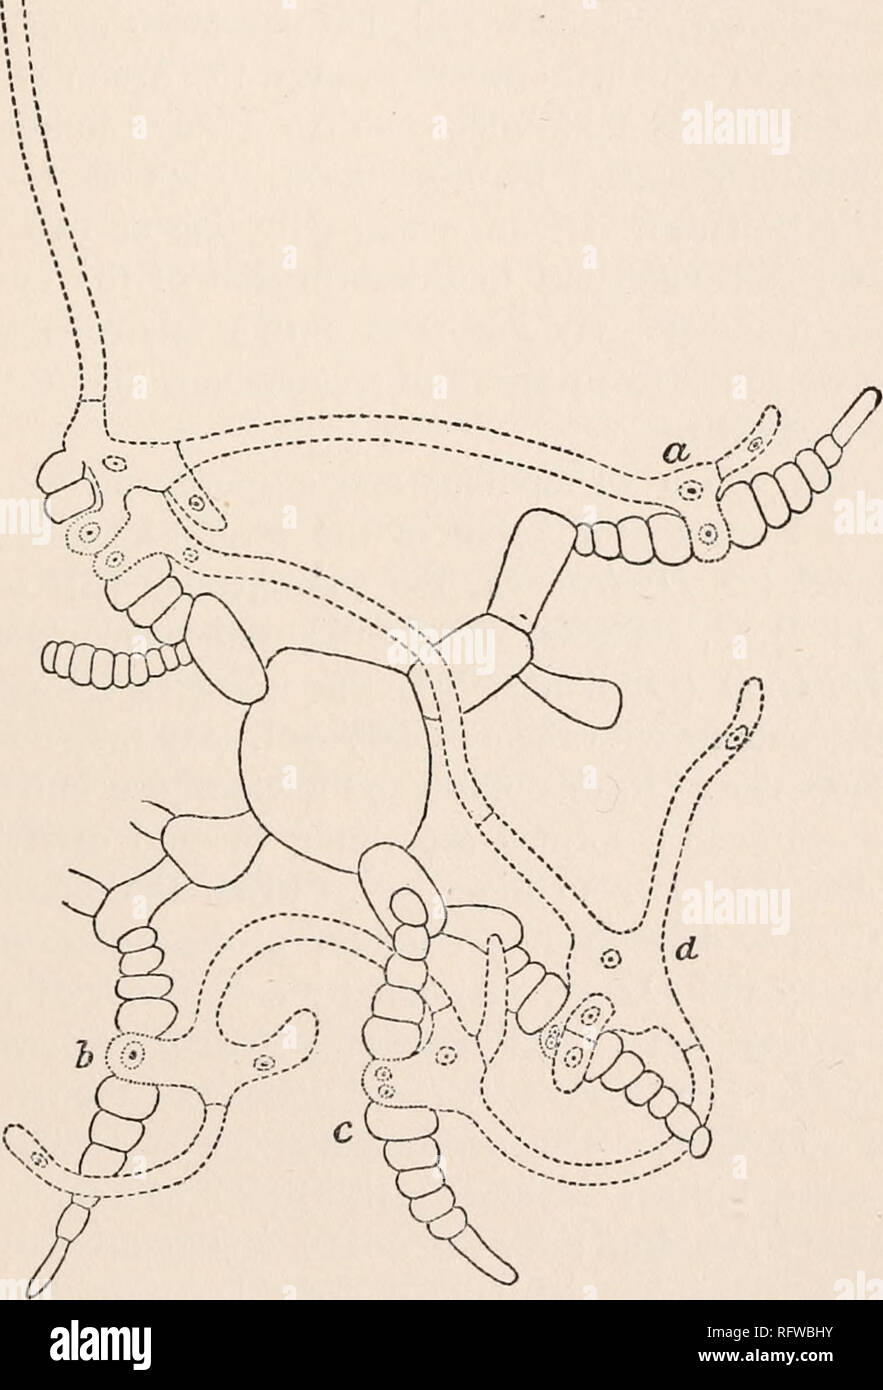 . Carnegie Institution of Washington publication. DUDRESNYA. 123 The development of the sporogenous filaments, their fusion with auxiliary cells, and the origin of cystocarps from the fusion cells will be more readily understood from the diagram in Fig. 49. At «, after n c. FIG. 49.—Diagram showing origin of sporogenous filaments and their union with various auxiliary cells in Dudrtsnya coccinea ; parts drawn by means of short dashes indicate trichogyne and sporogenous filaments, while the dots indicate the auxiliary cells ; a, b, c, d, places where sporogenous filaments have united with auxil Stock Photo